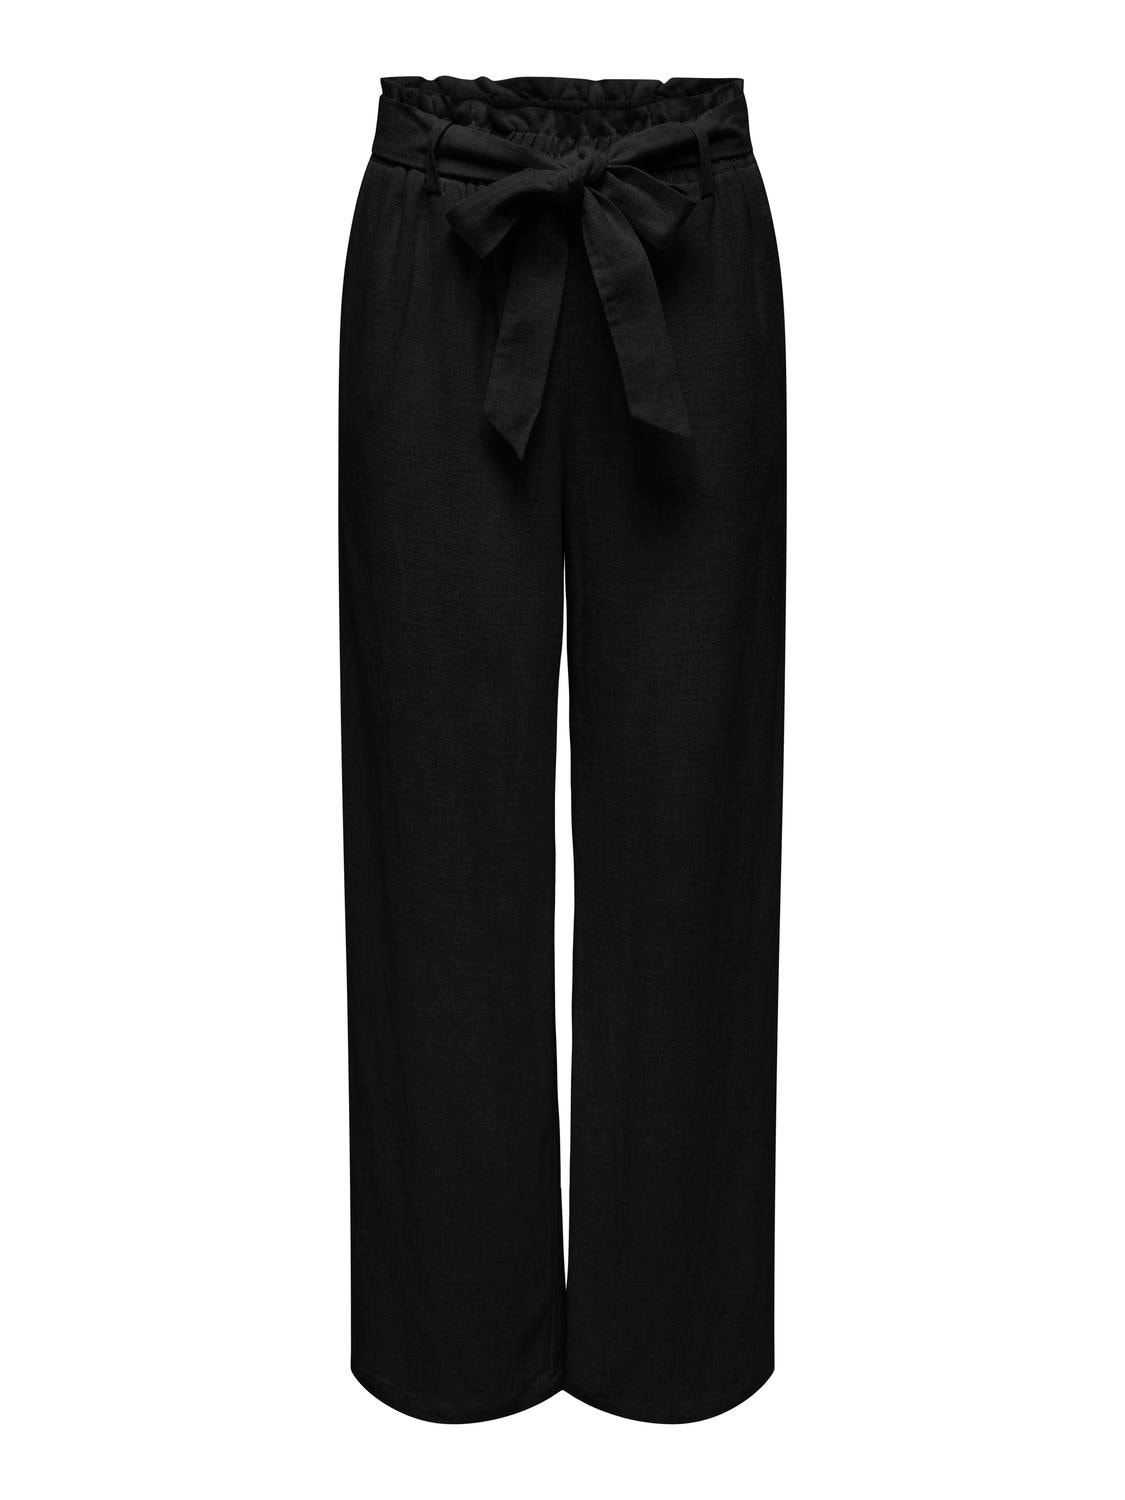 ONLY High waisted linen pants -Black - 15322259